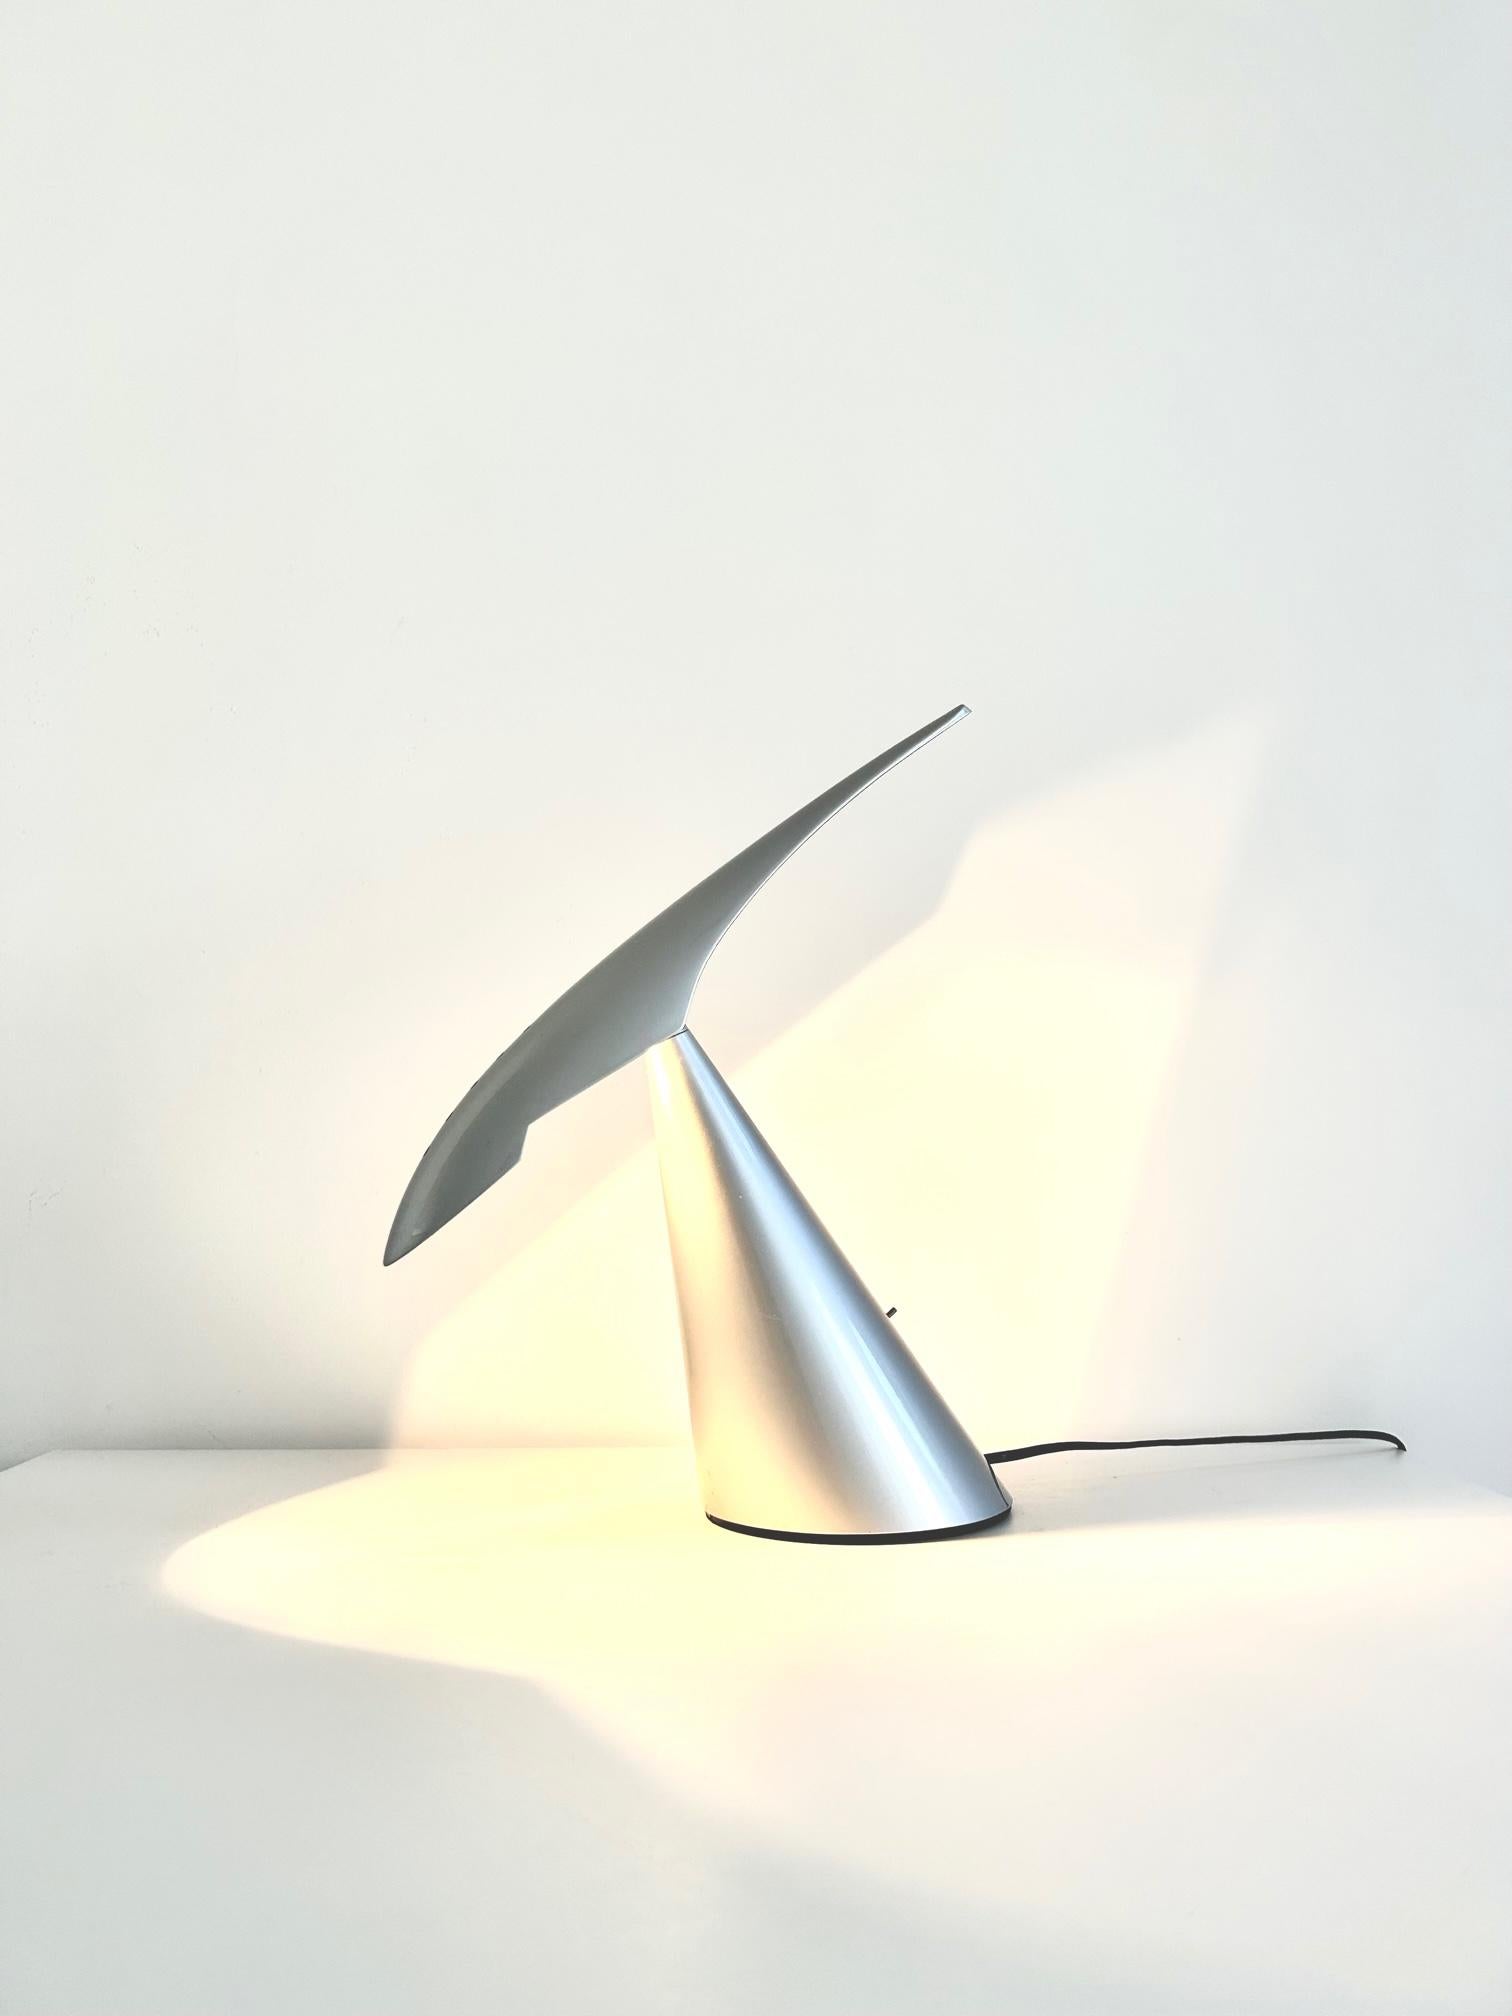 Pair of Ran Desk Lamps, Peter Naumann, ClassiCon, 1990s For Sale 5